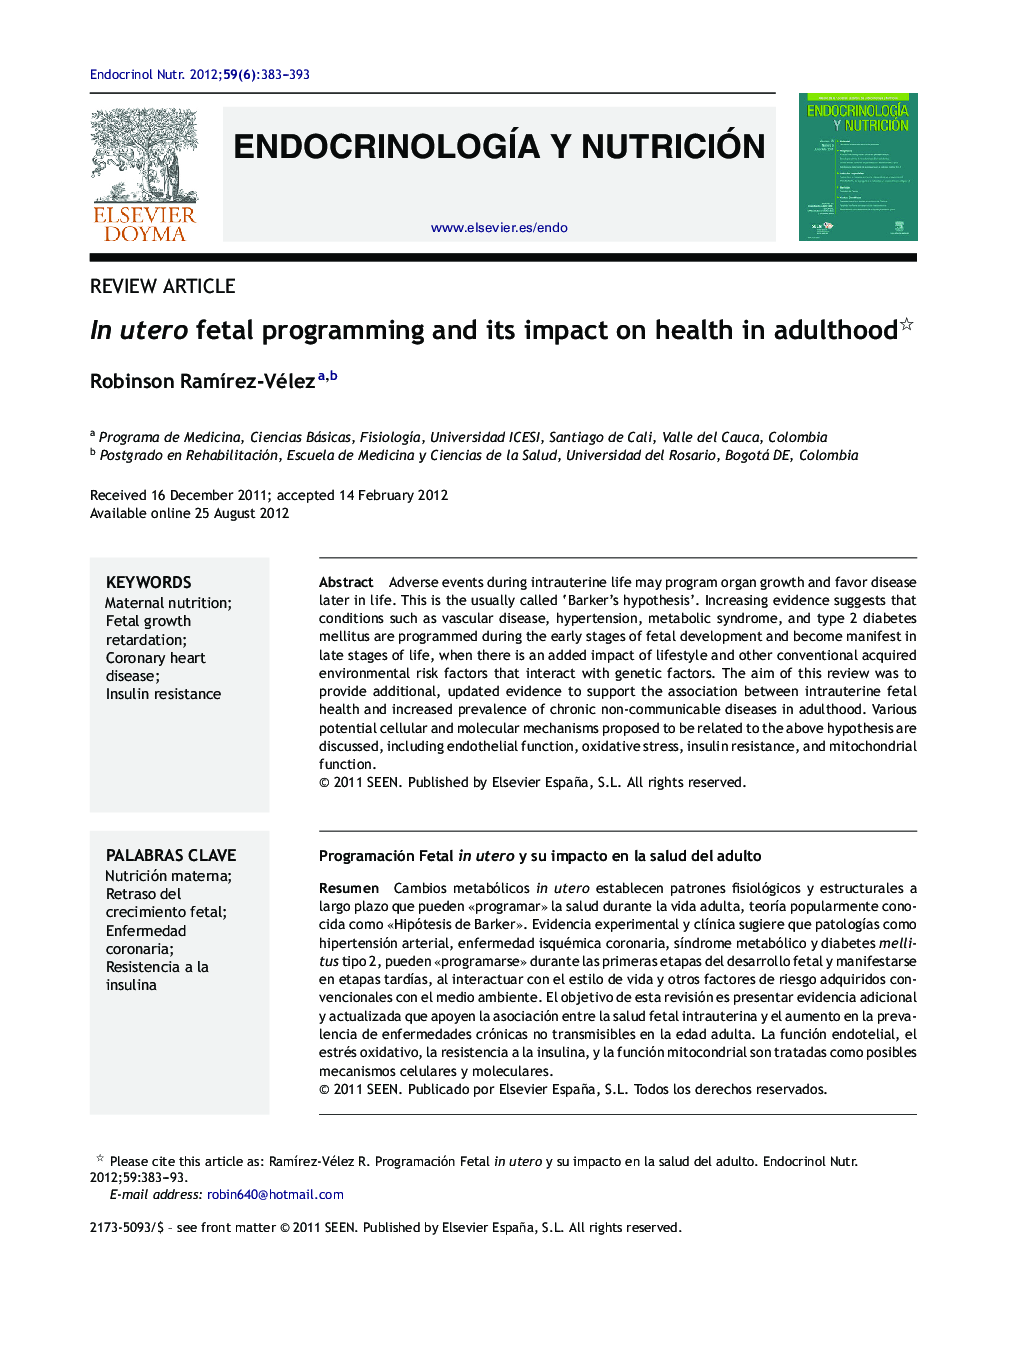 In utero fetal programming and its impact on health in adulthood 